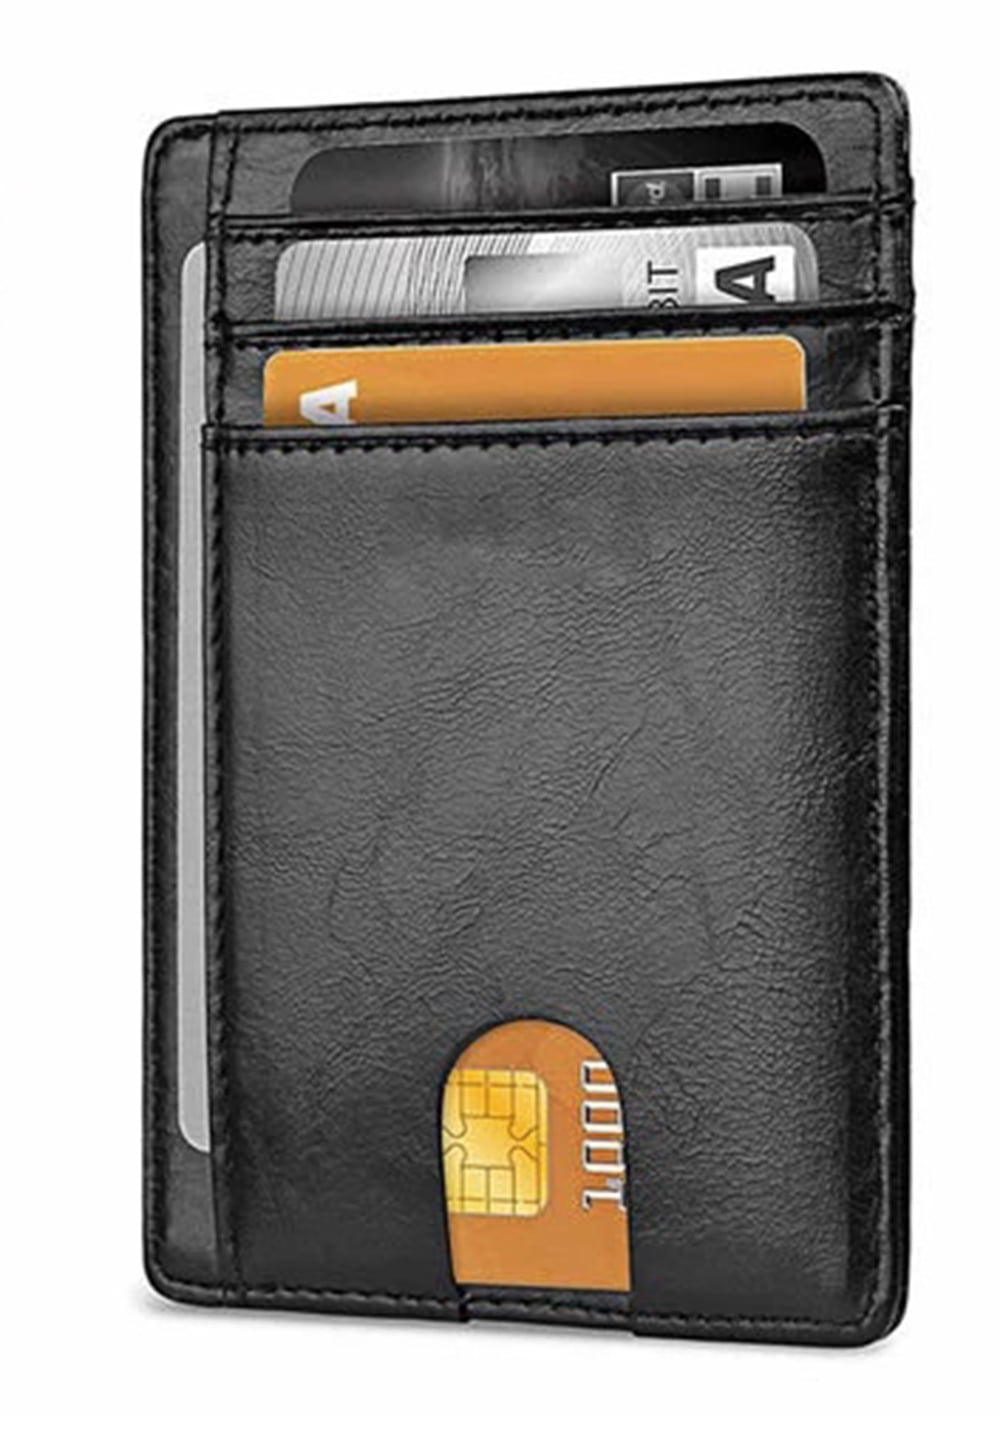 Secure Gents Black Leather Wallet Tab Fastening a 85 